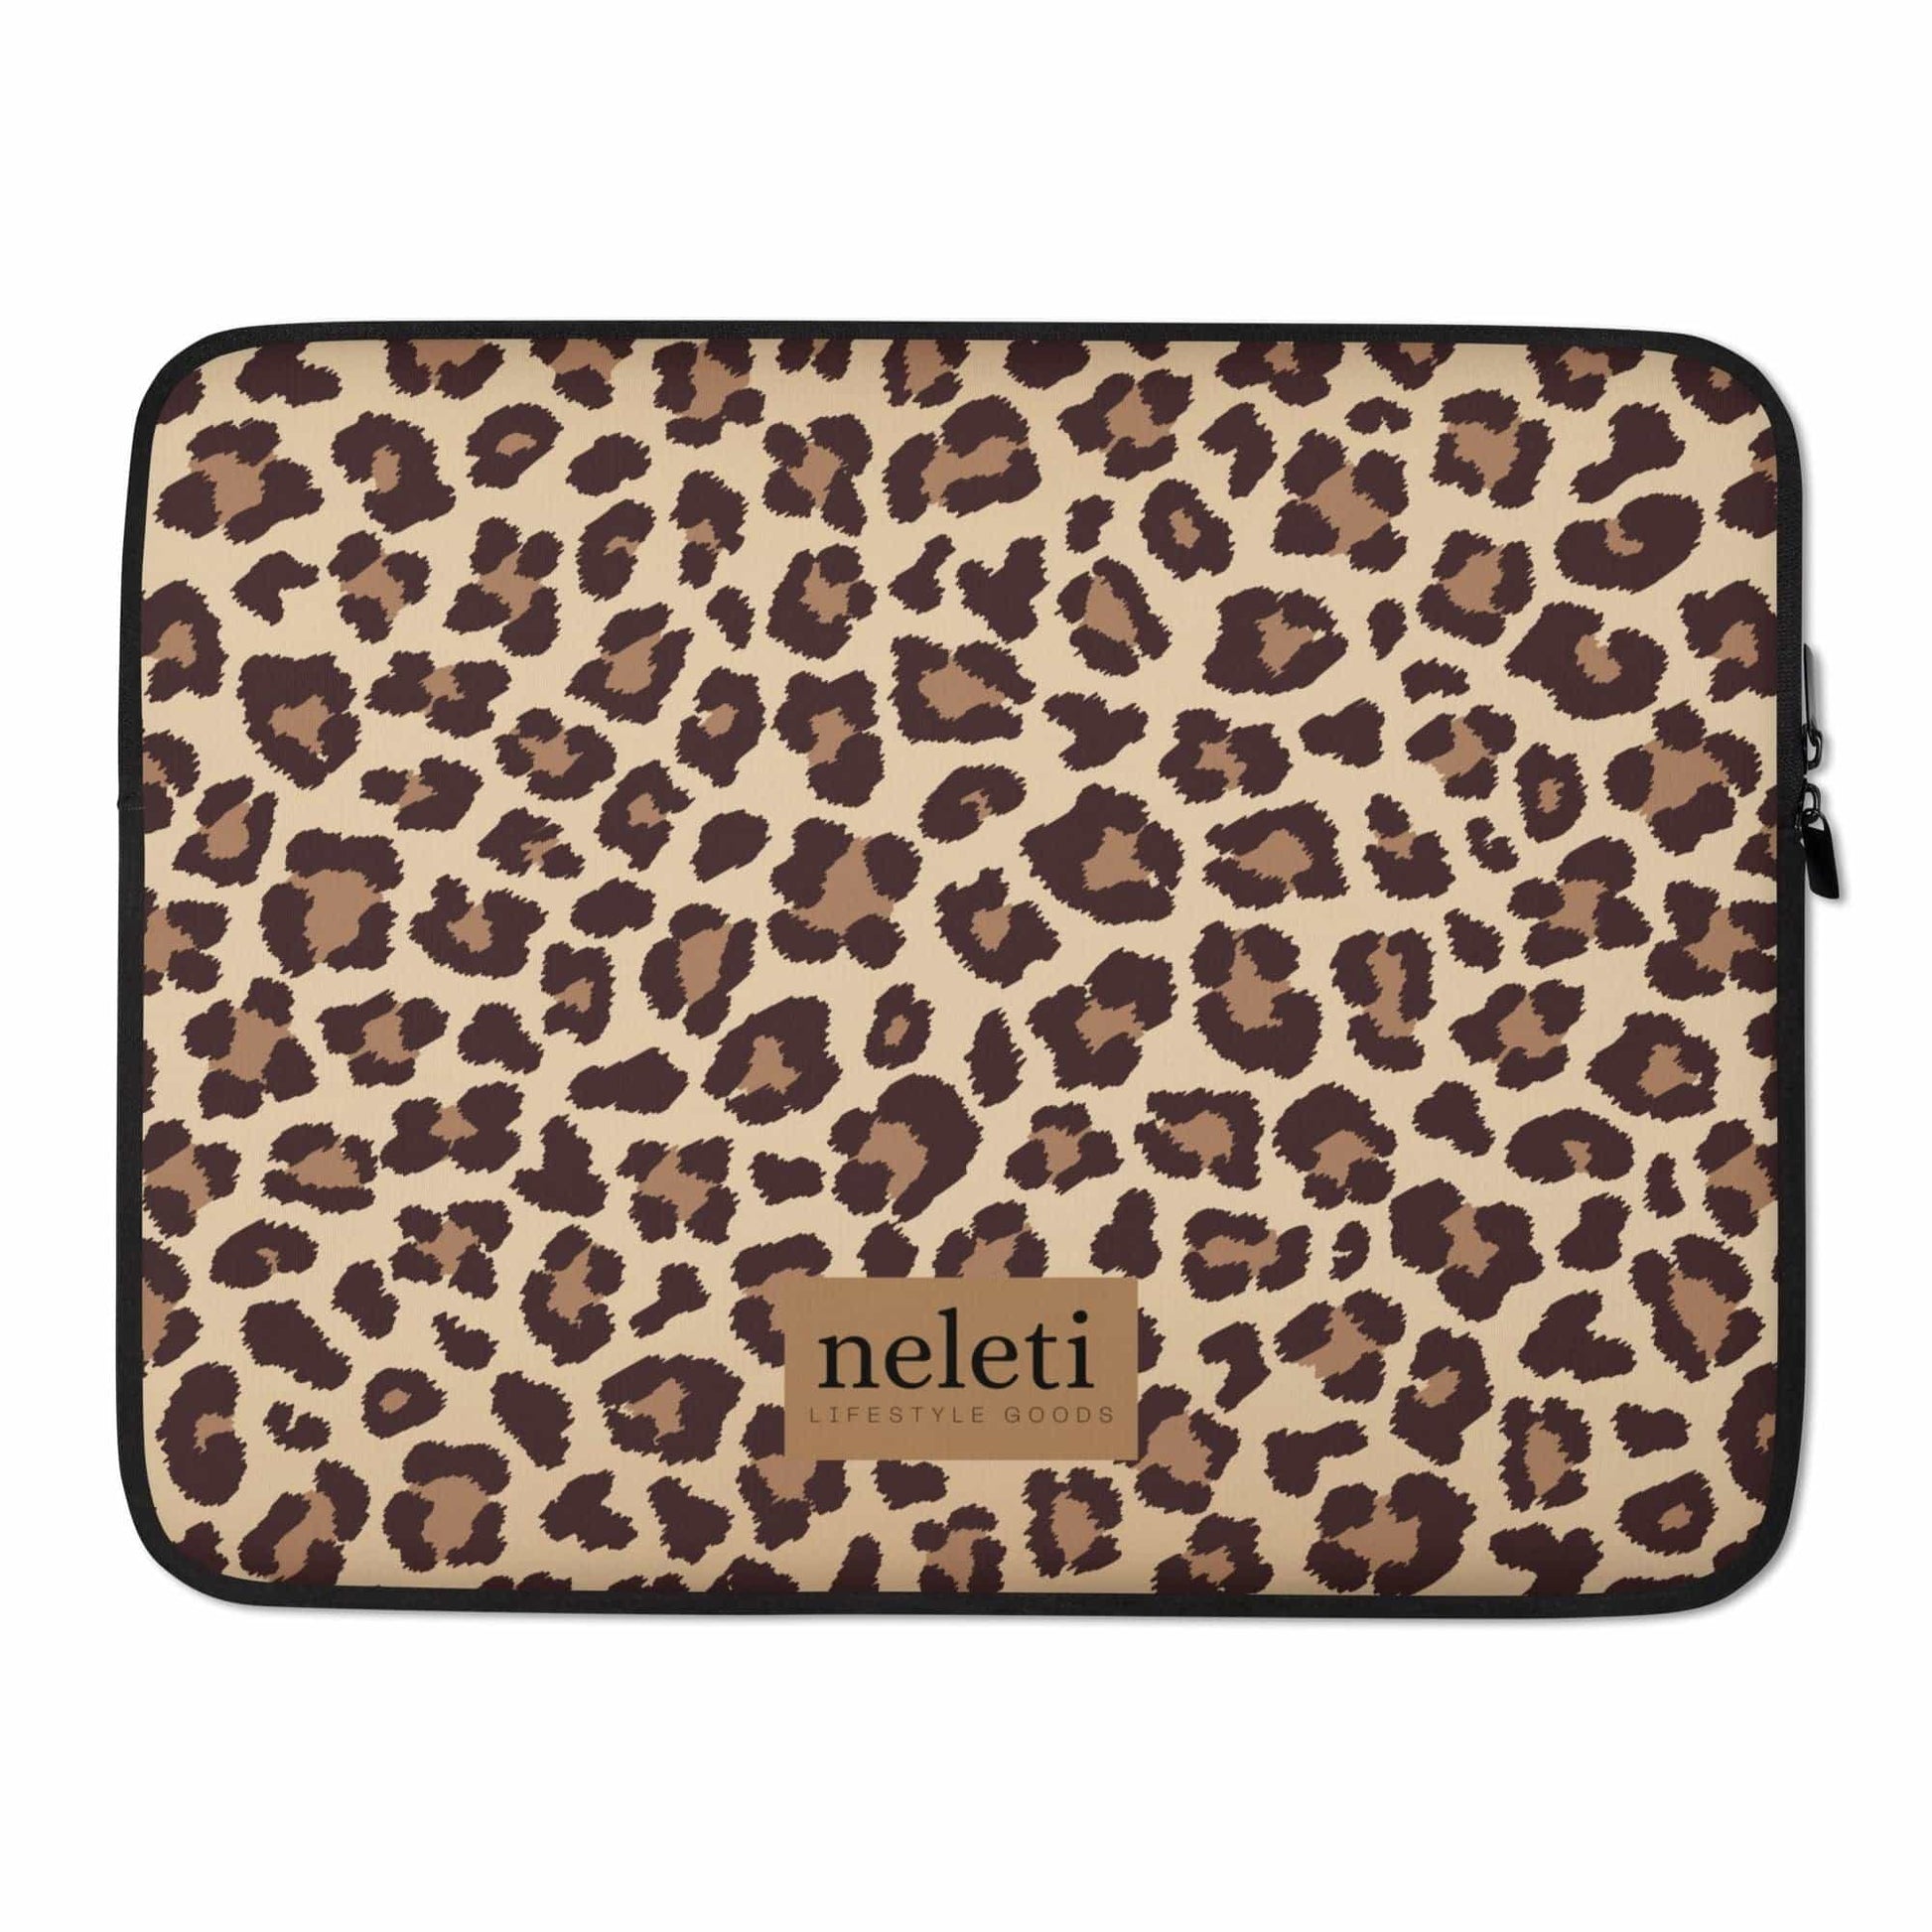 neleti.com-laptop-sleeve-15-inches-with-leopard-print